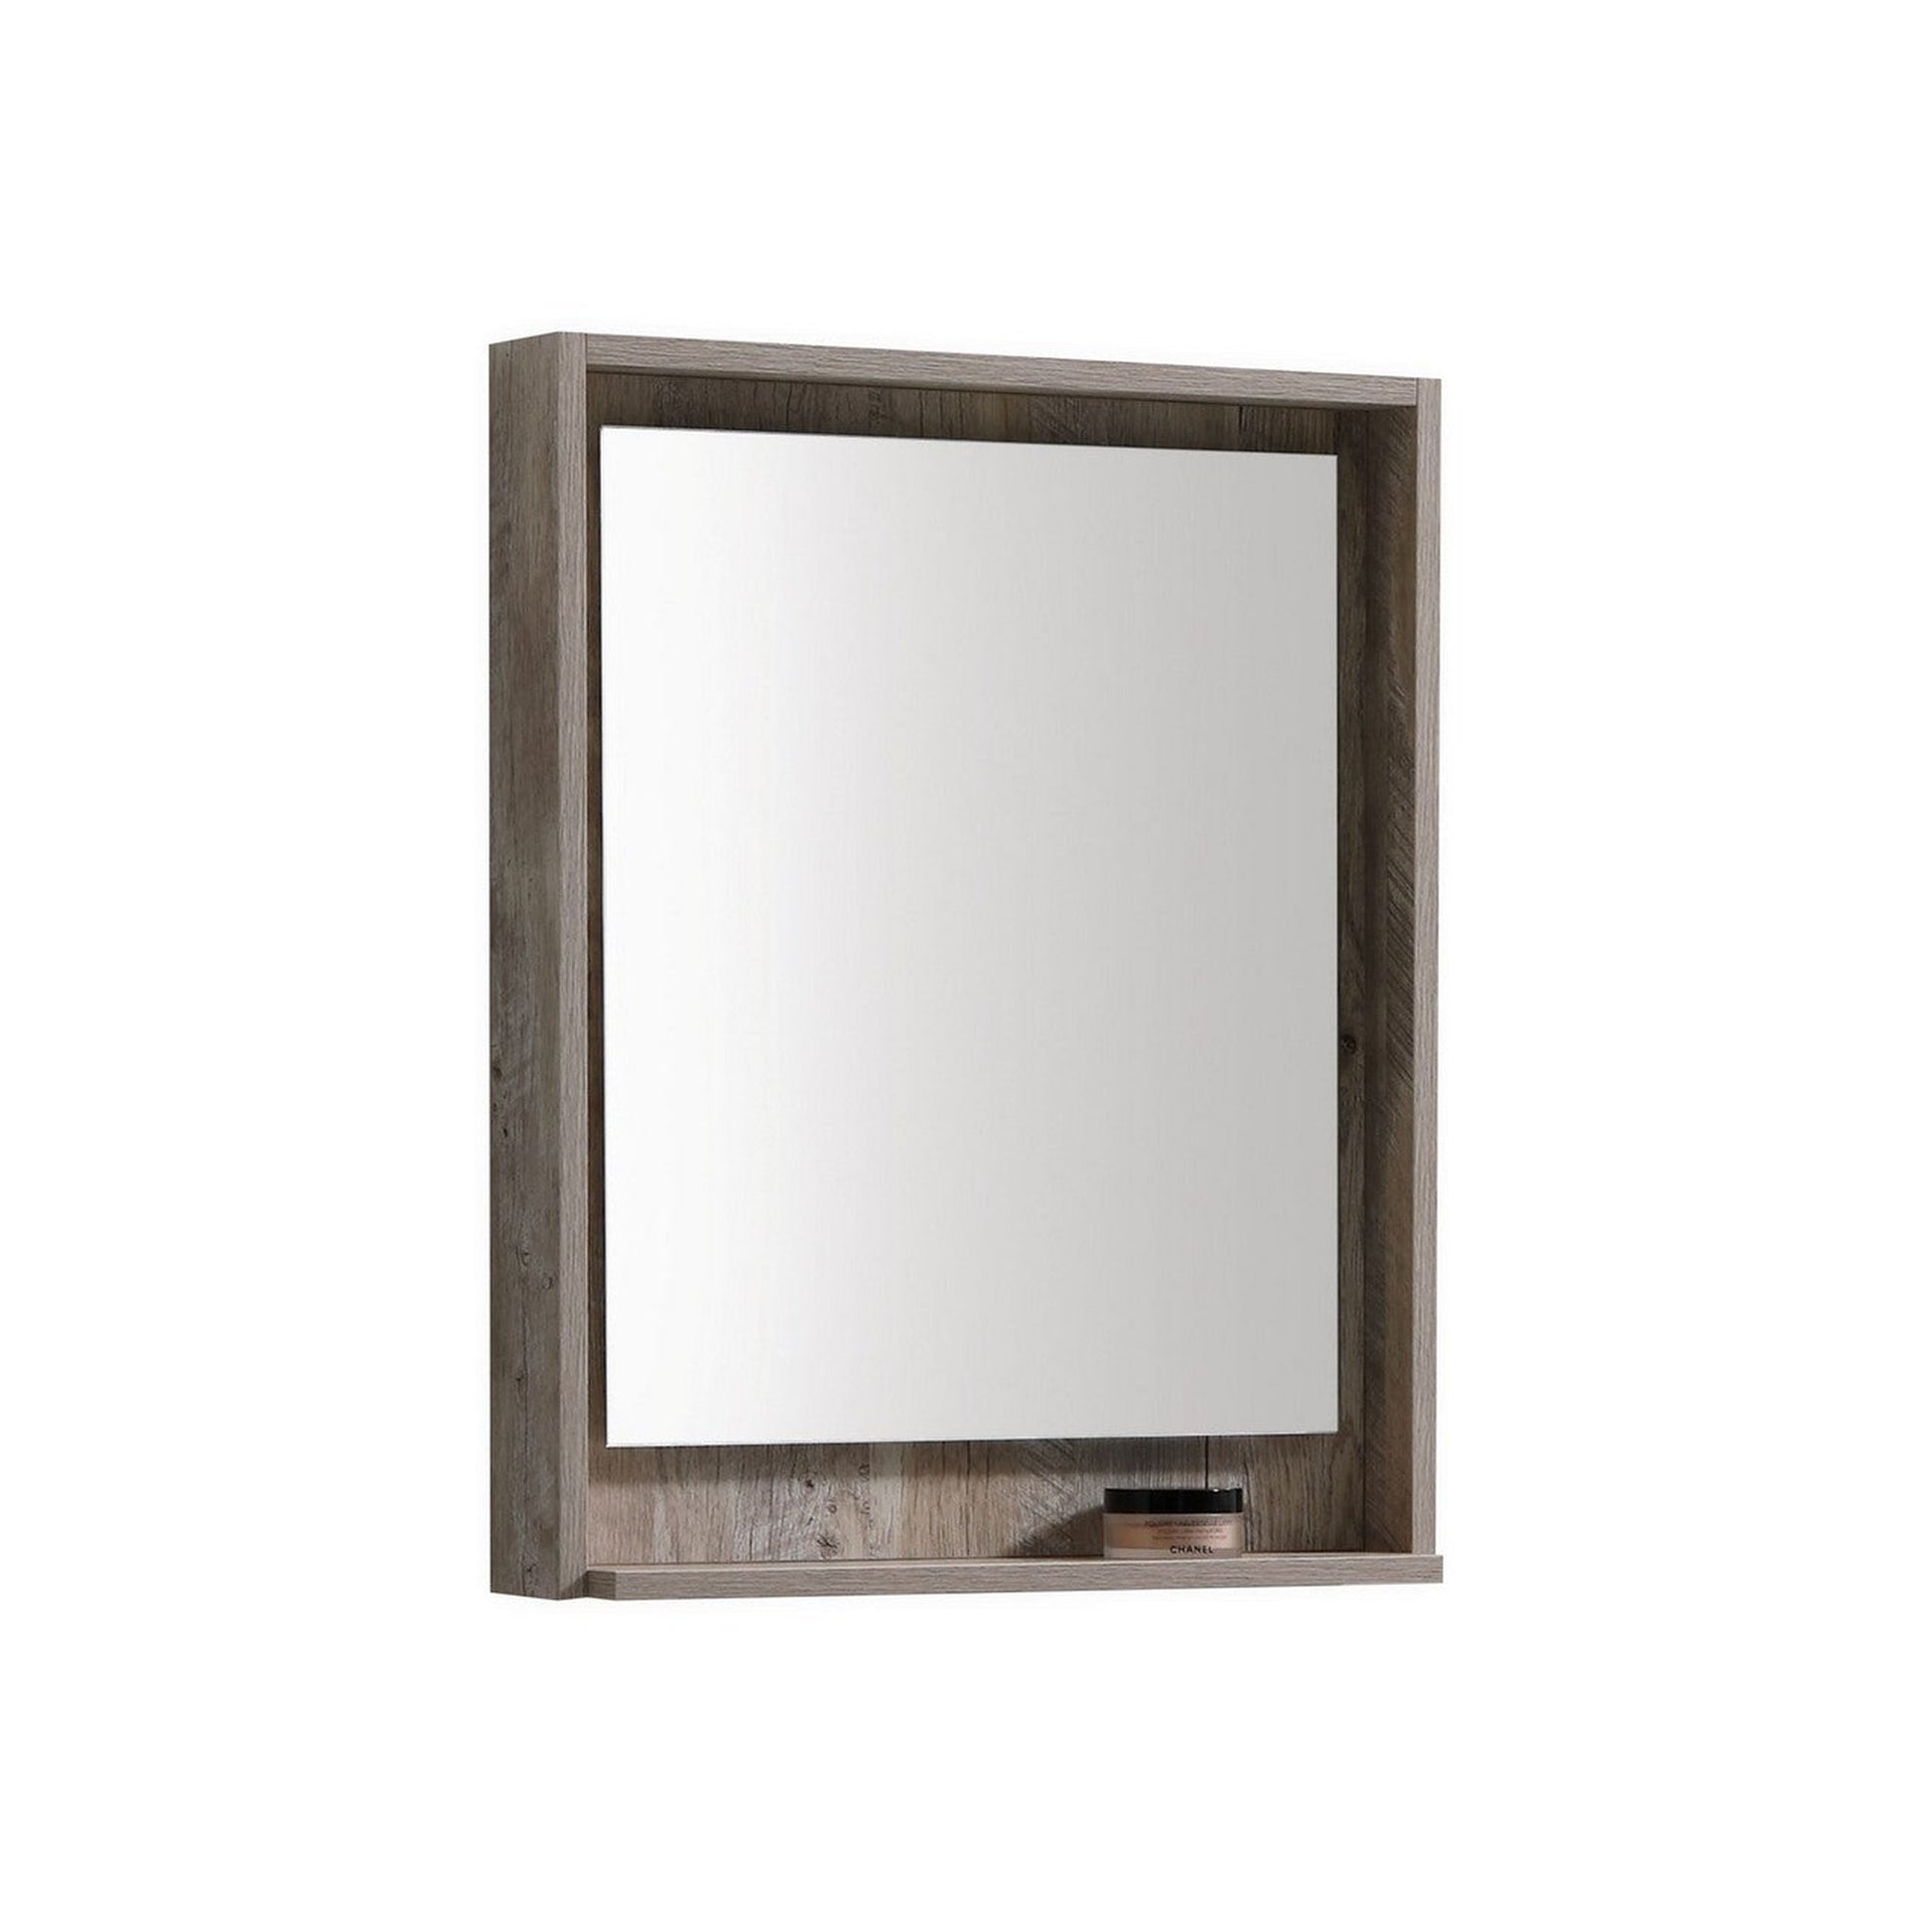 KubeBath Bliss 18" Nature Wood Wall-Mounted Modern Bathroom Vanity With Single Integrated Acrylic Sink With Overflow and 24" Wood Framed Mirror With Shelf